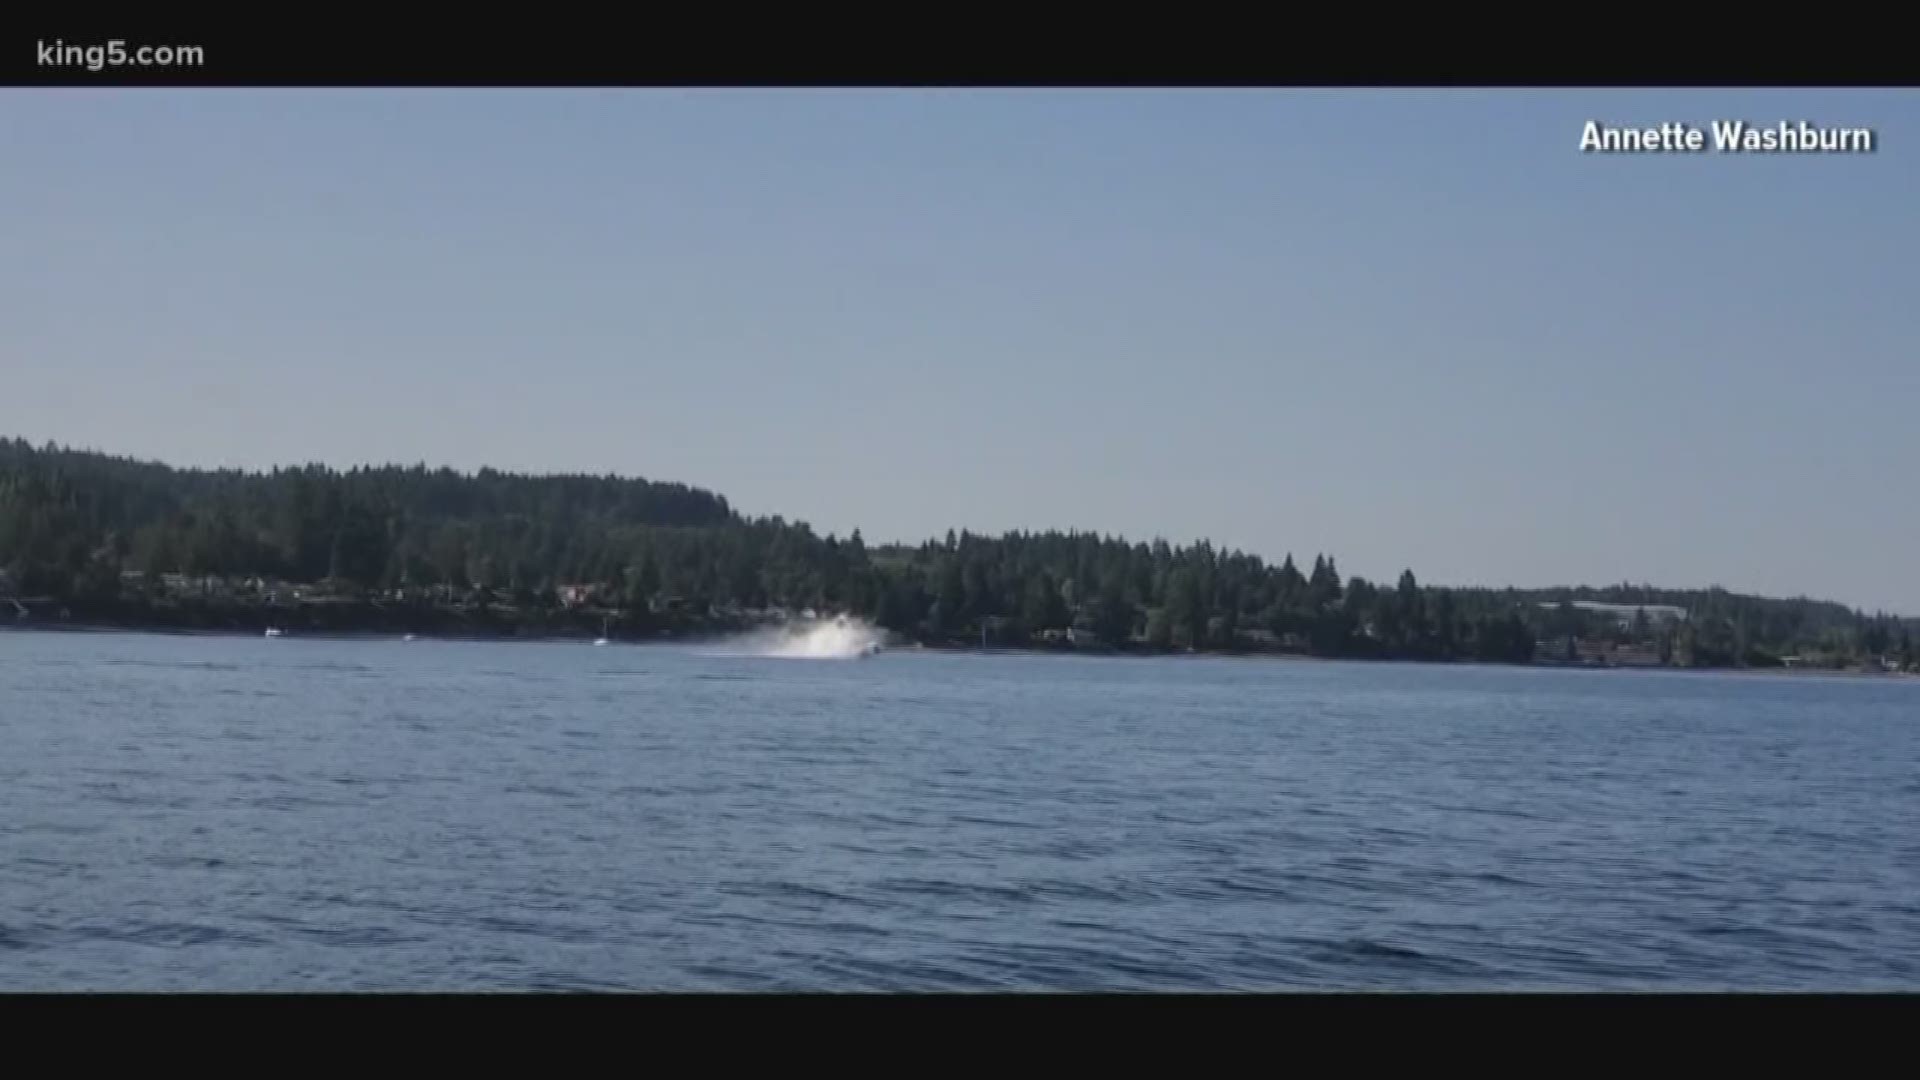 One person is safe after their plane crashed into the water near Kitsap County on Tuesday afternoon. A witness describes seeing the plane flip and rushing to save the pilot.